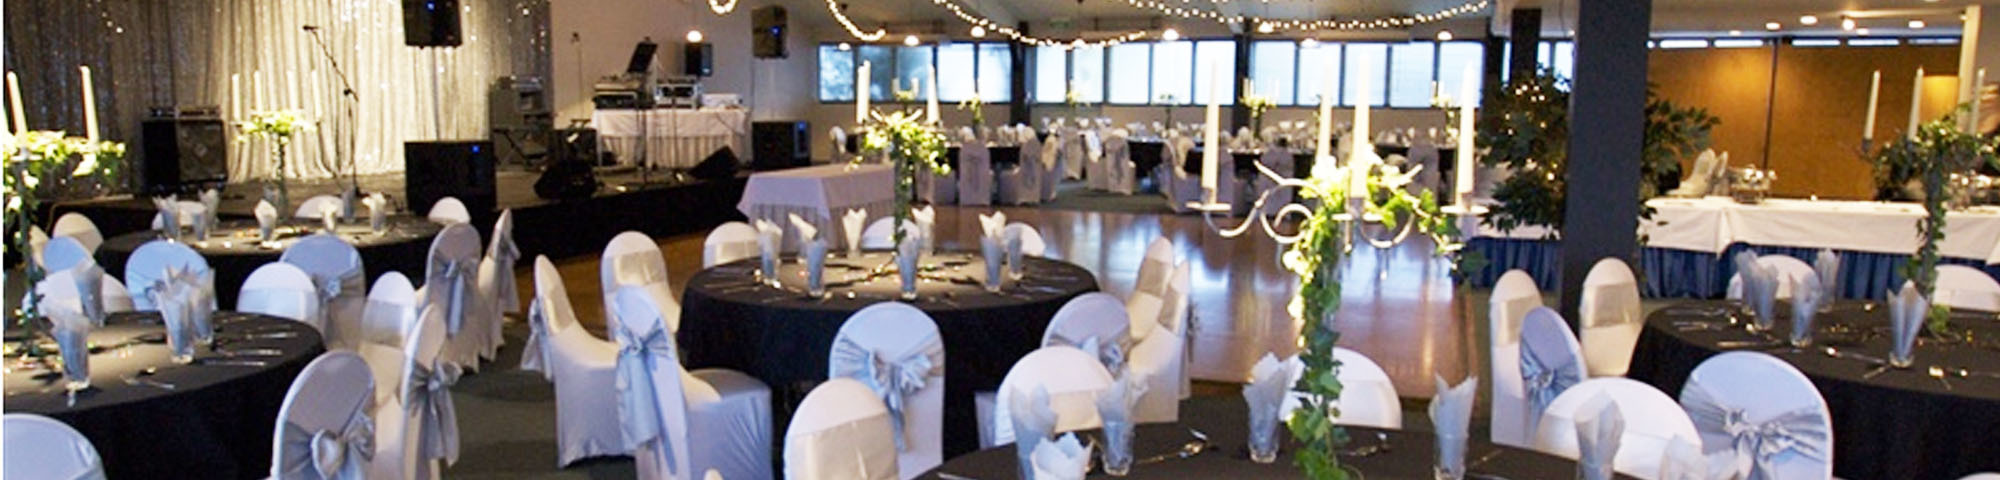 Wedding Catering Auckland Reception Venue Catering